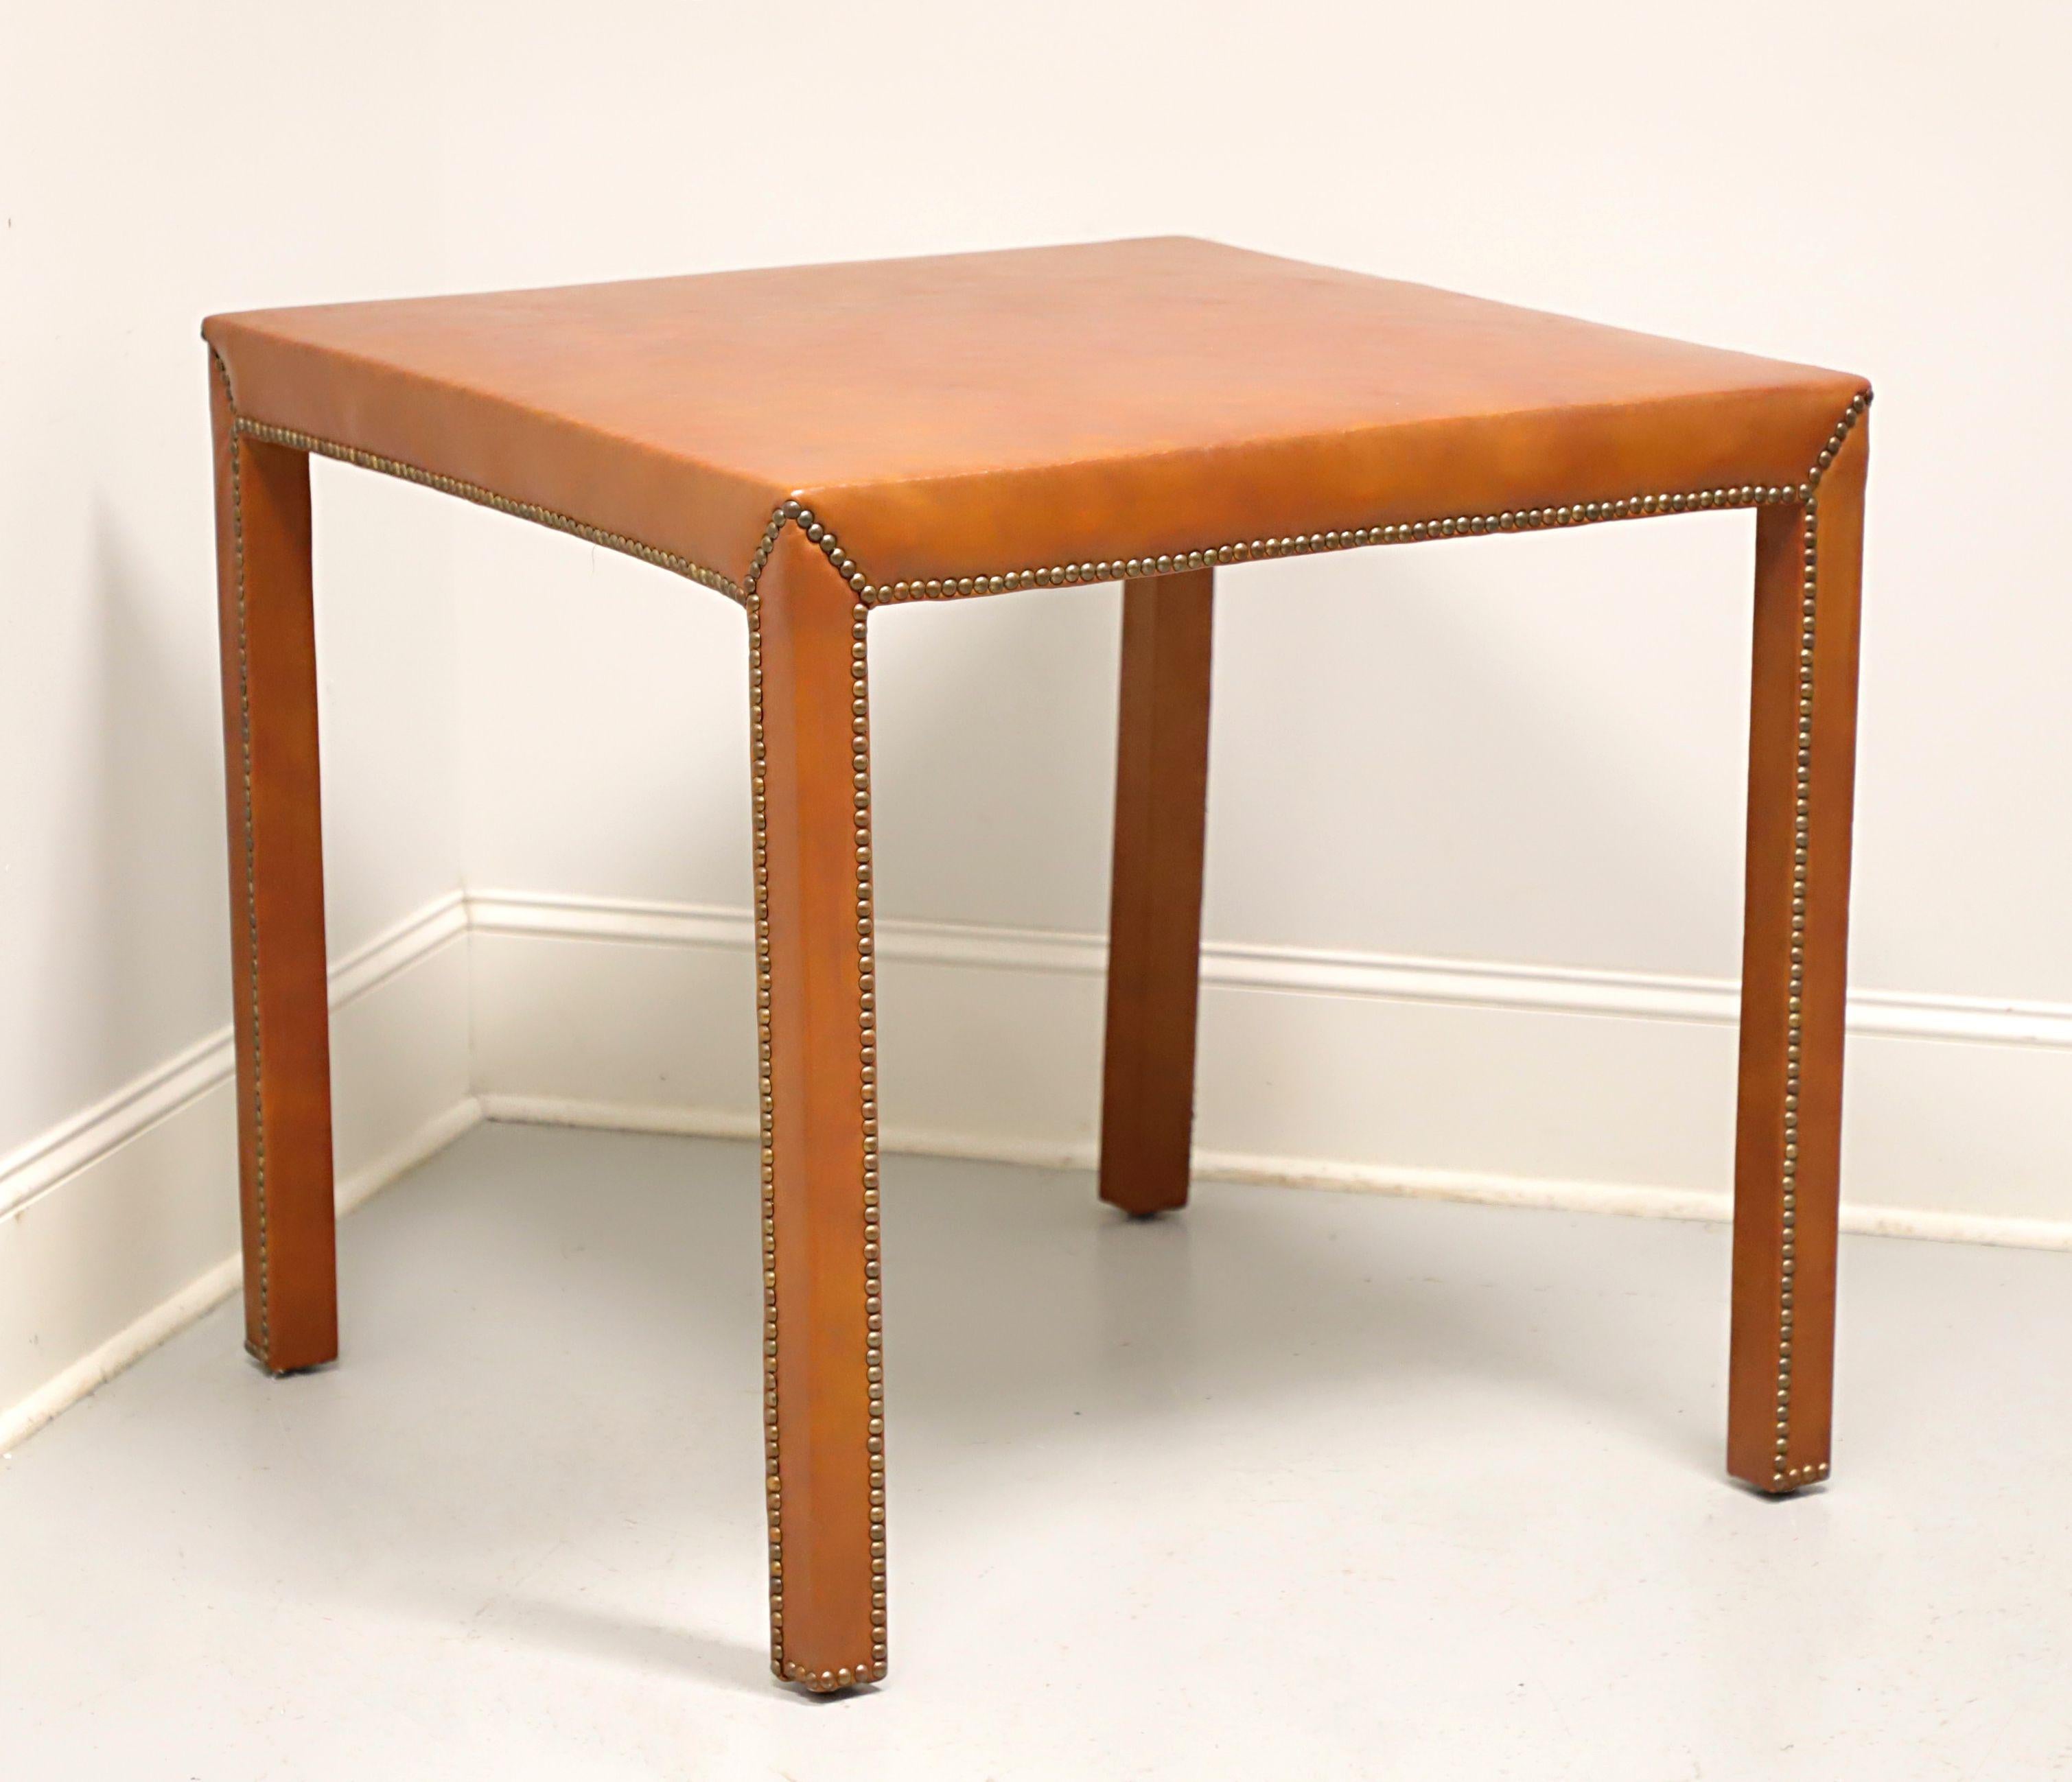 A Traditional style game table by Classic Leather. Solid wood frame covered in a light brown color leather, brass nailhead trim, and straight front legs. Made in Conover, North Carolina, USA, in the mid 20th Century.

Measures: 32.5w 32.5d 30h, Knee